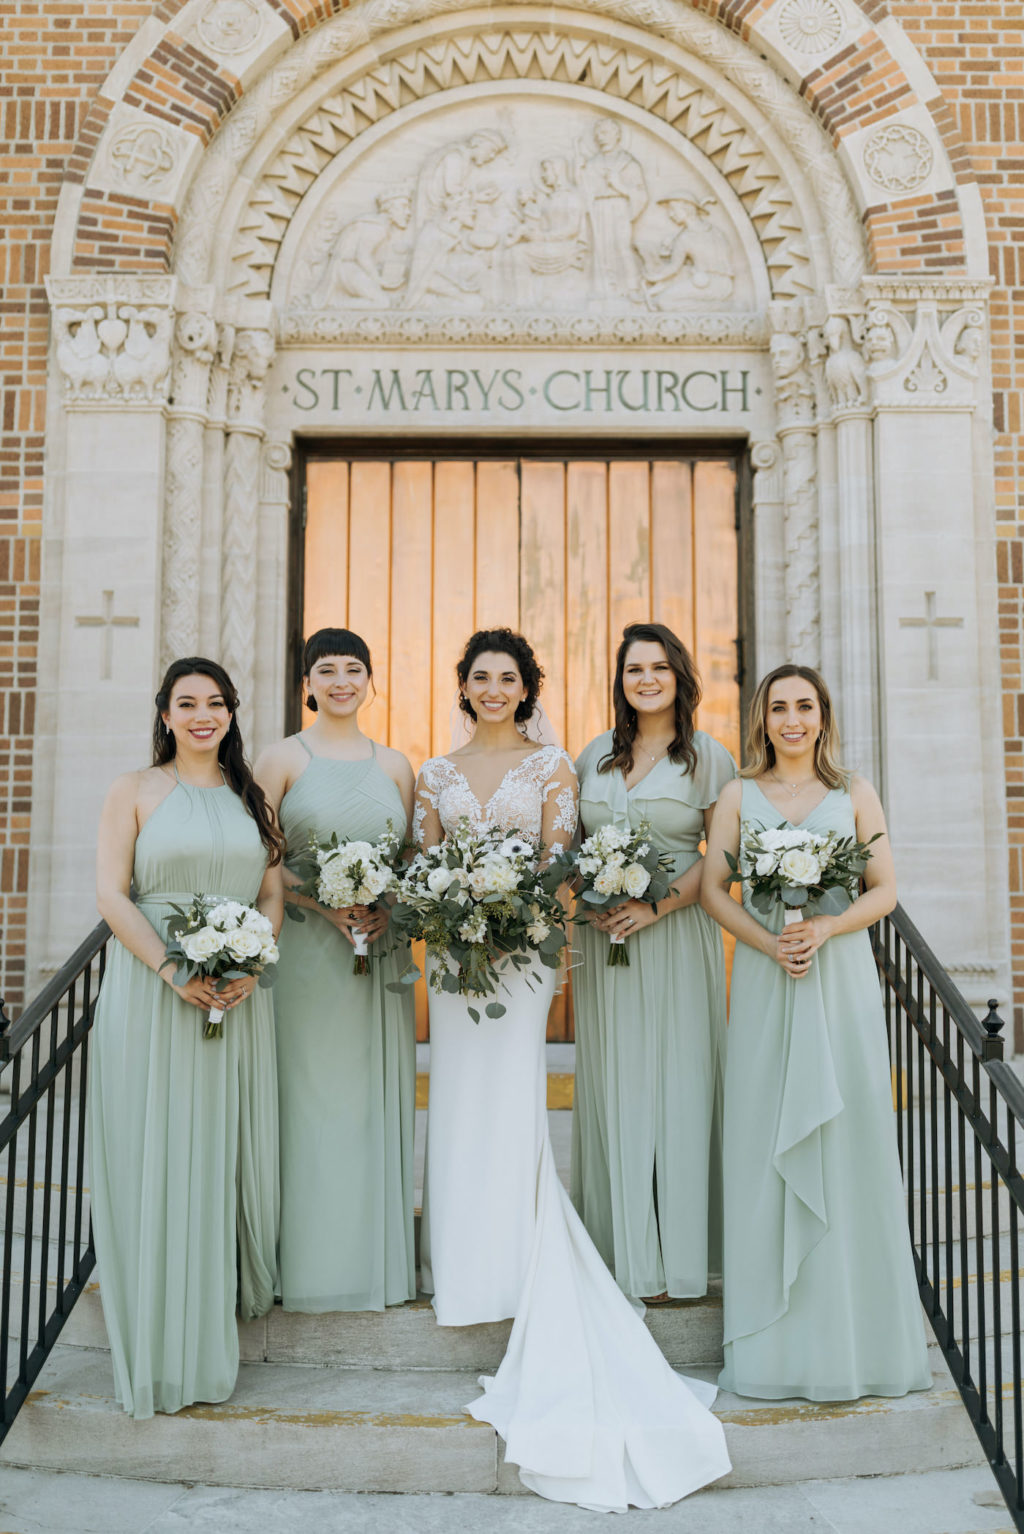 Classic Tampa Bay Bride and Bridesmaids, Bride Wearing Illusion Lace Long Sleeve Martina Liana Wedding Dress, Bridesmaids in Long Mix and Match Sage Green Azazie Dresses, Holding Elegant White Anemone Floral Bouquet with Greenery, The Steps of Saint Mary Our Lady of Grace Catholic Church in St. Petersburg | Florida Wedding Planner Blue Skies Weddings and Events | St. Pete Beach Hair and Makeup Artist Femme Akoi Beauty Studio